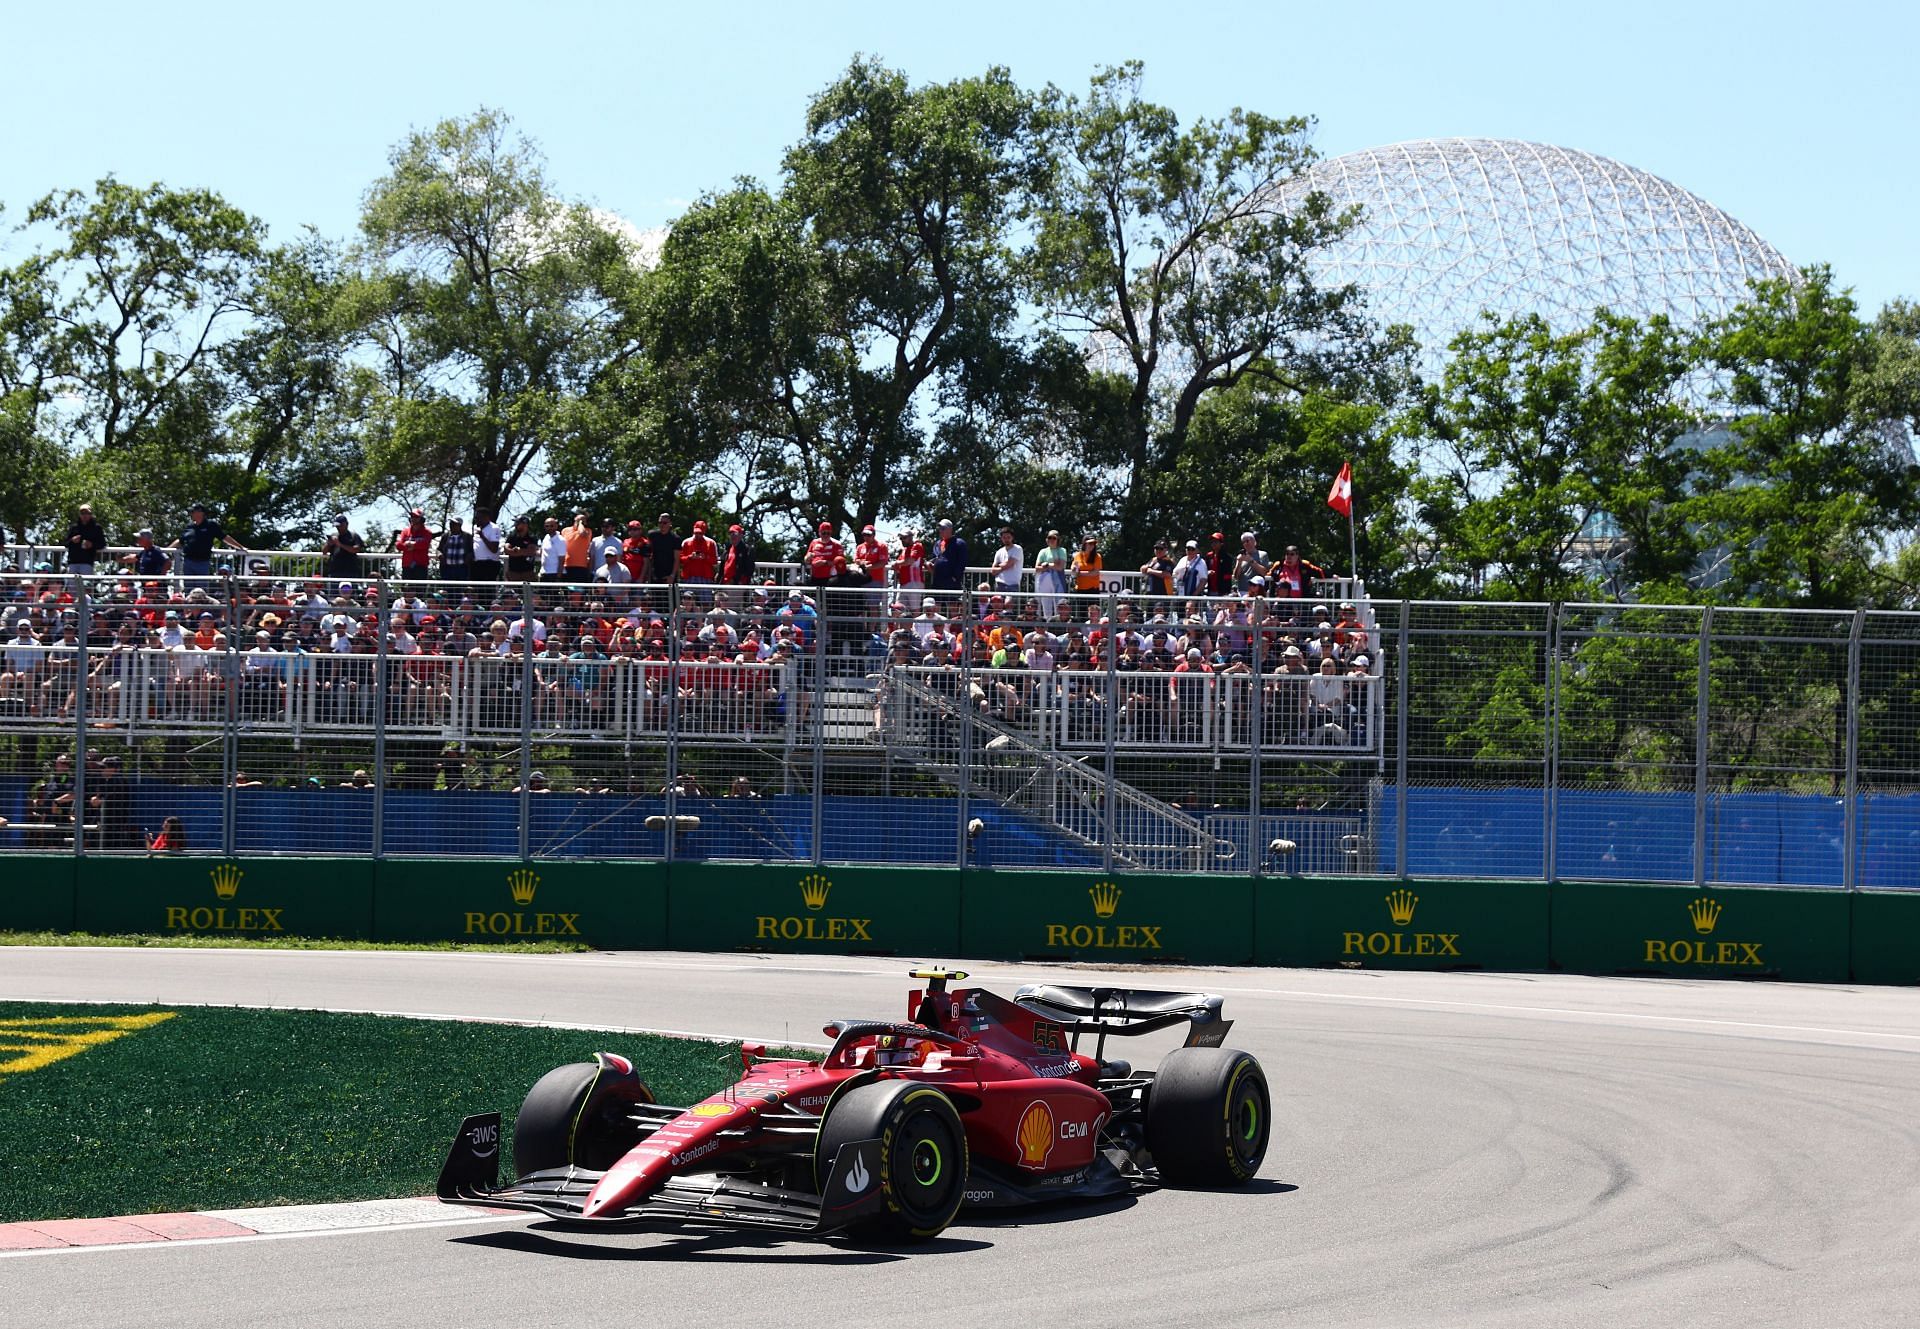 Ferrari driver Carlos Sainz in action during the 2022 F1 Canadian GP. (Photo by Clive Rose/Getty Images)